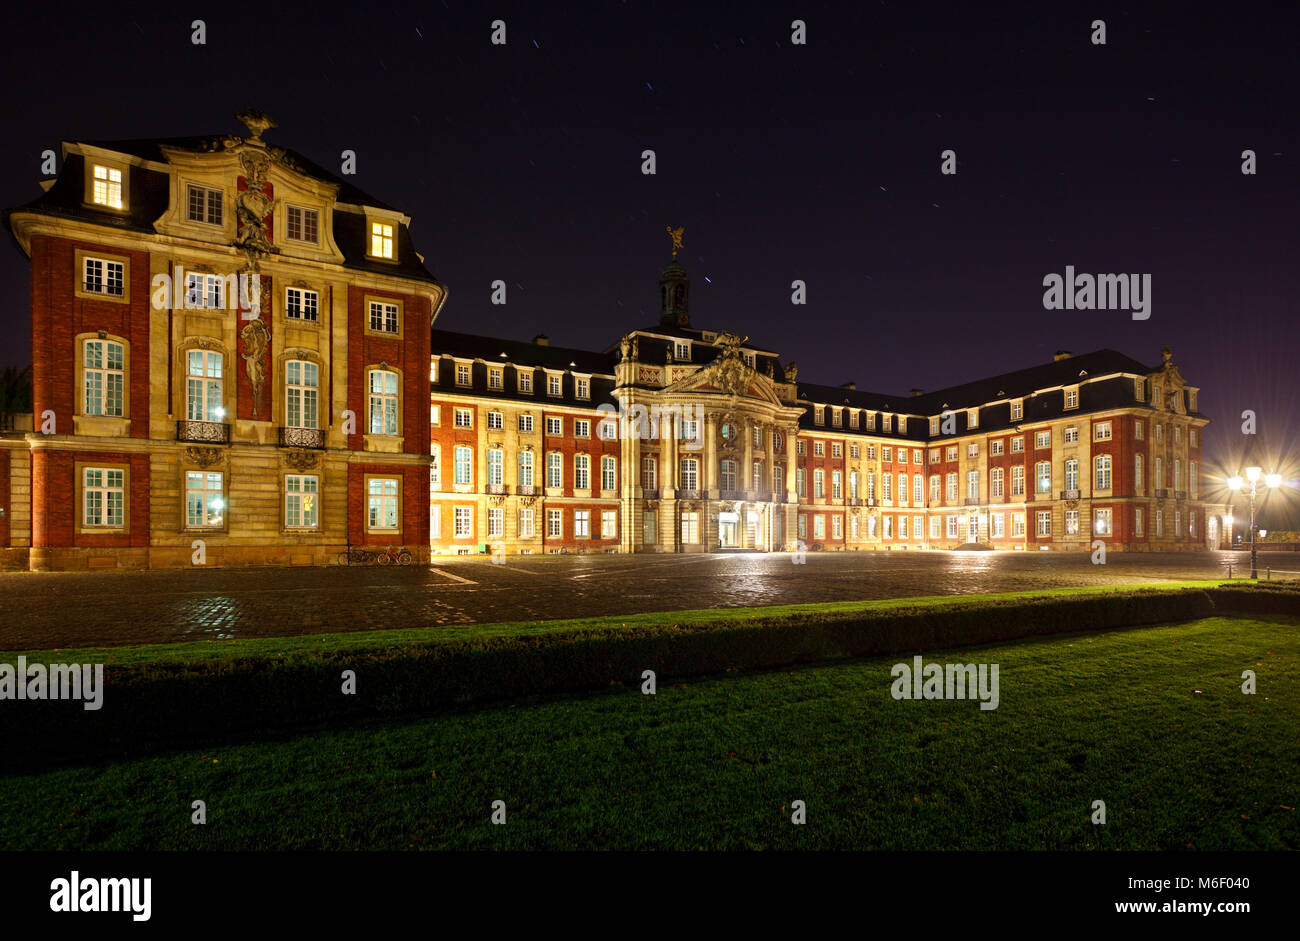 The large castle of Muenster, Germany at night which is also part of the famous university. Stock Photo